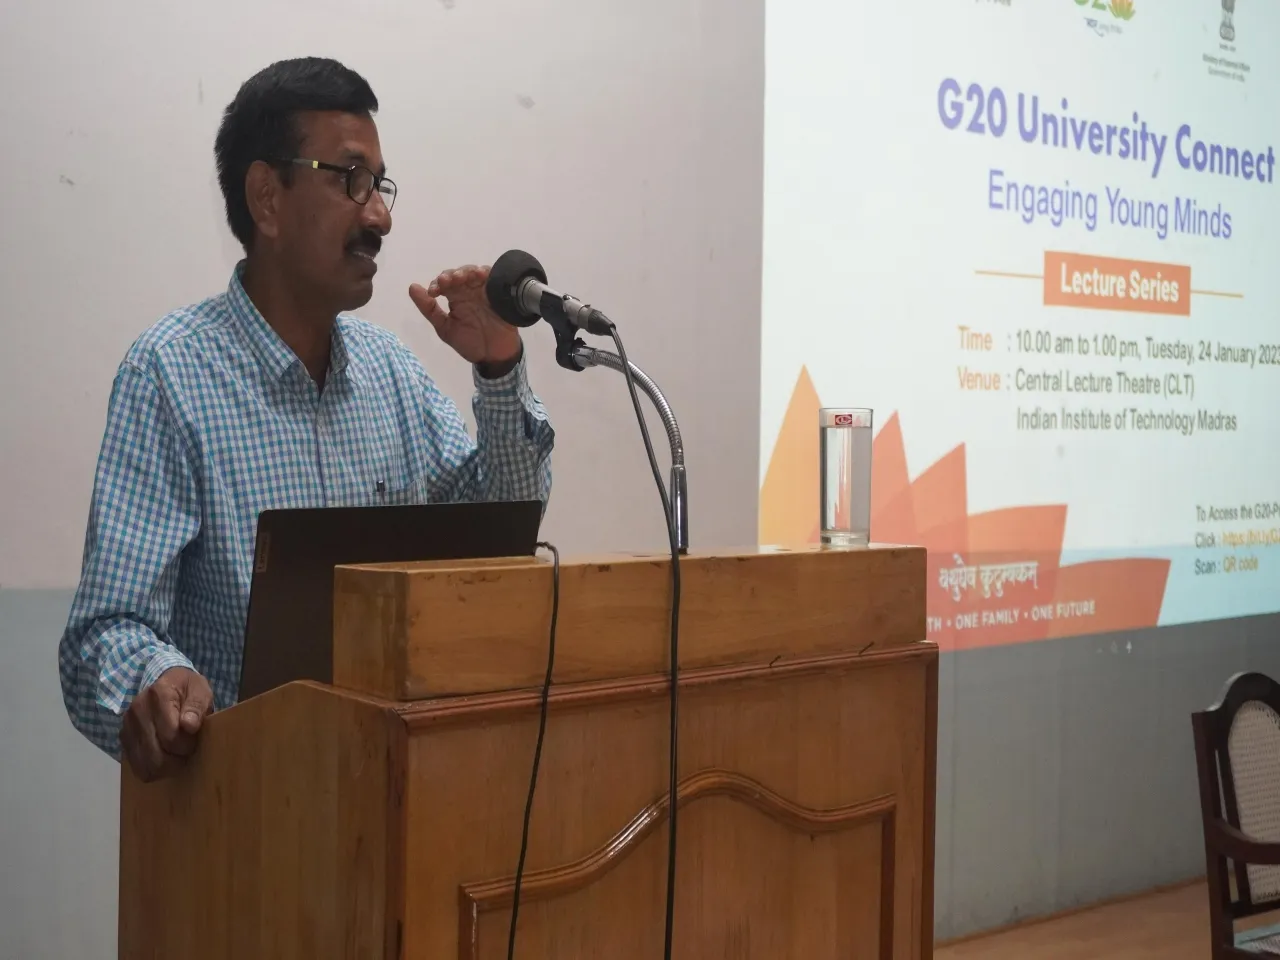 IIT Madras hosts G20 University Connect Lecture Series